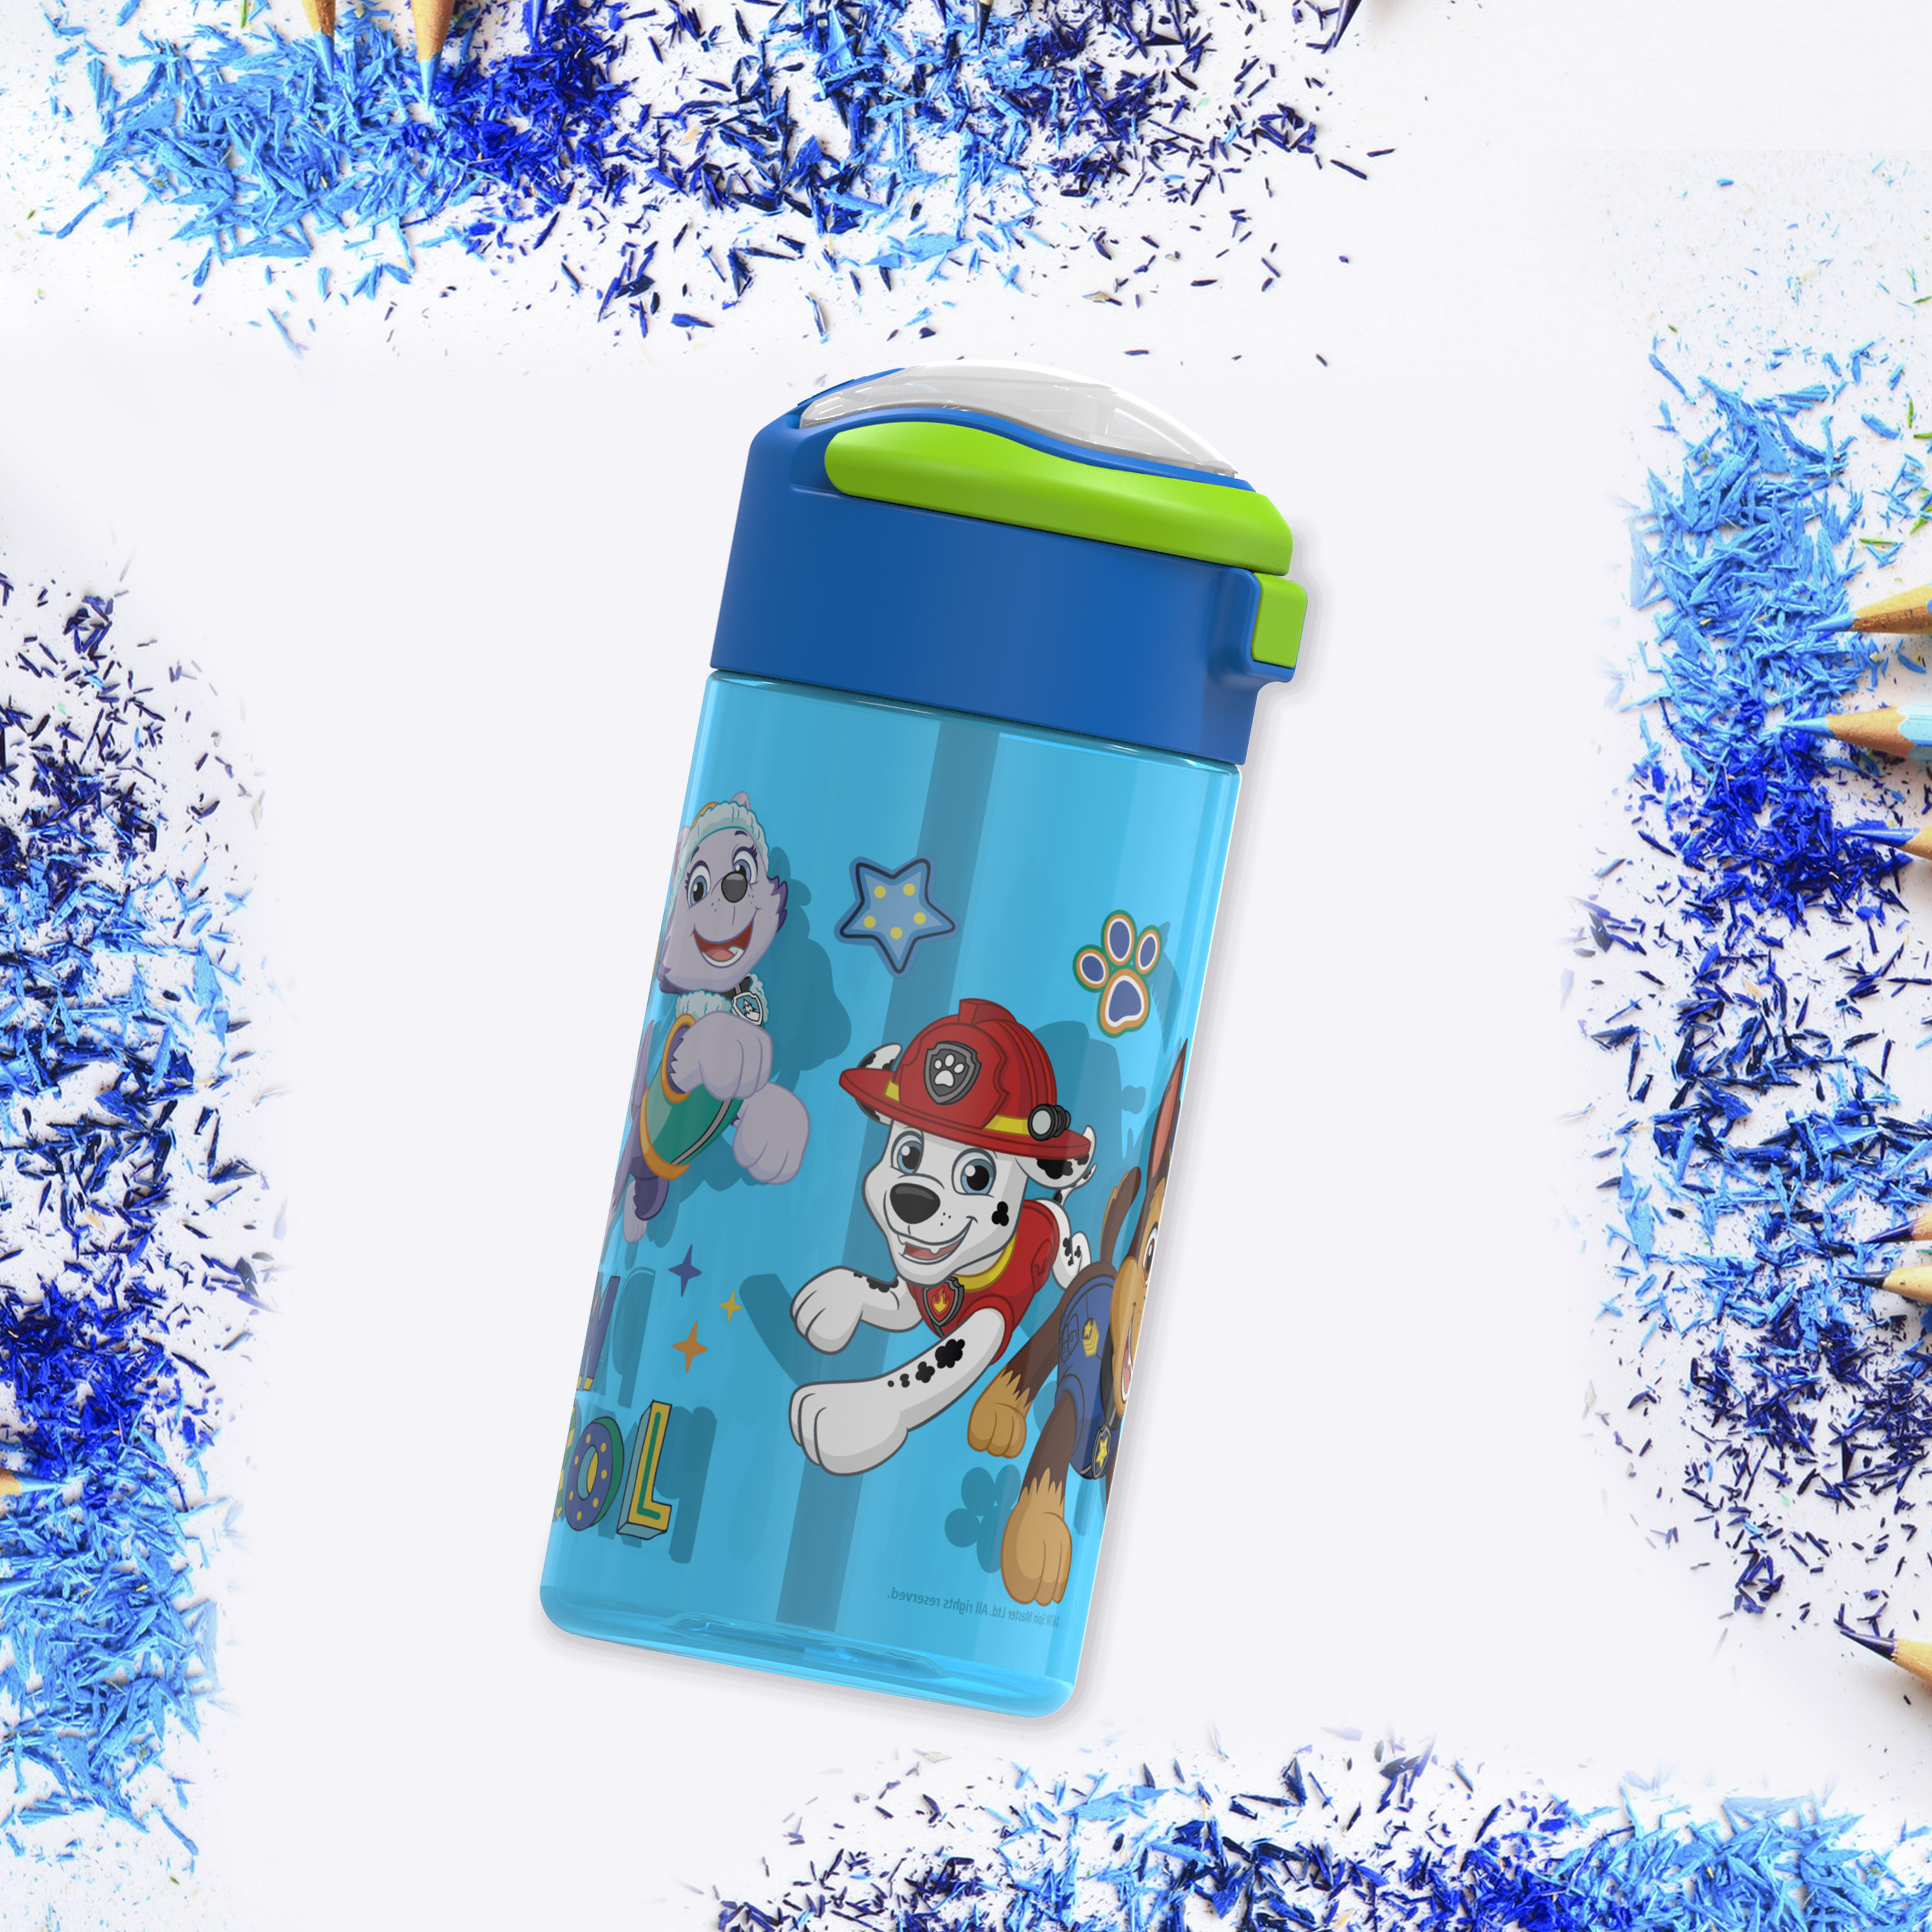 Paw Patrol 18 ounce Reusable Plastic Water Bottle with Push-button lid, Chase, Marshall & Rubble slideshow image 4